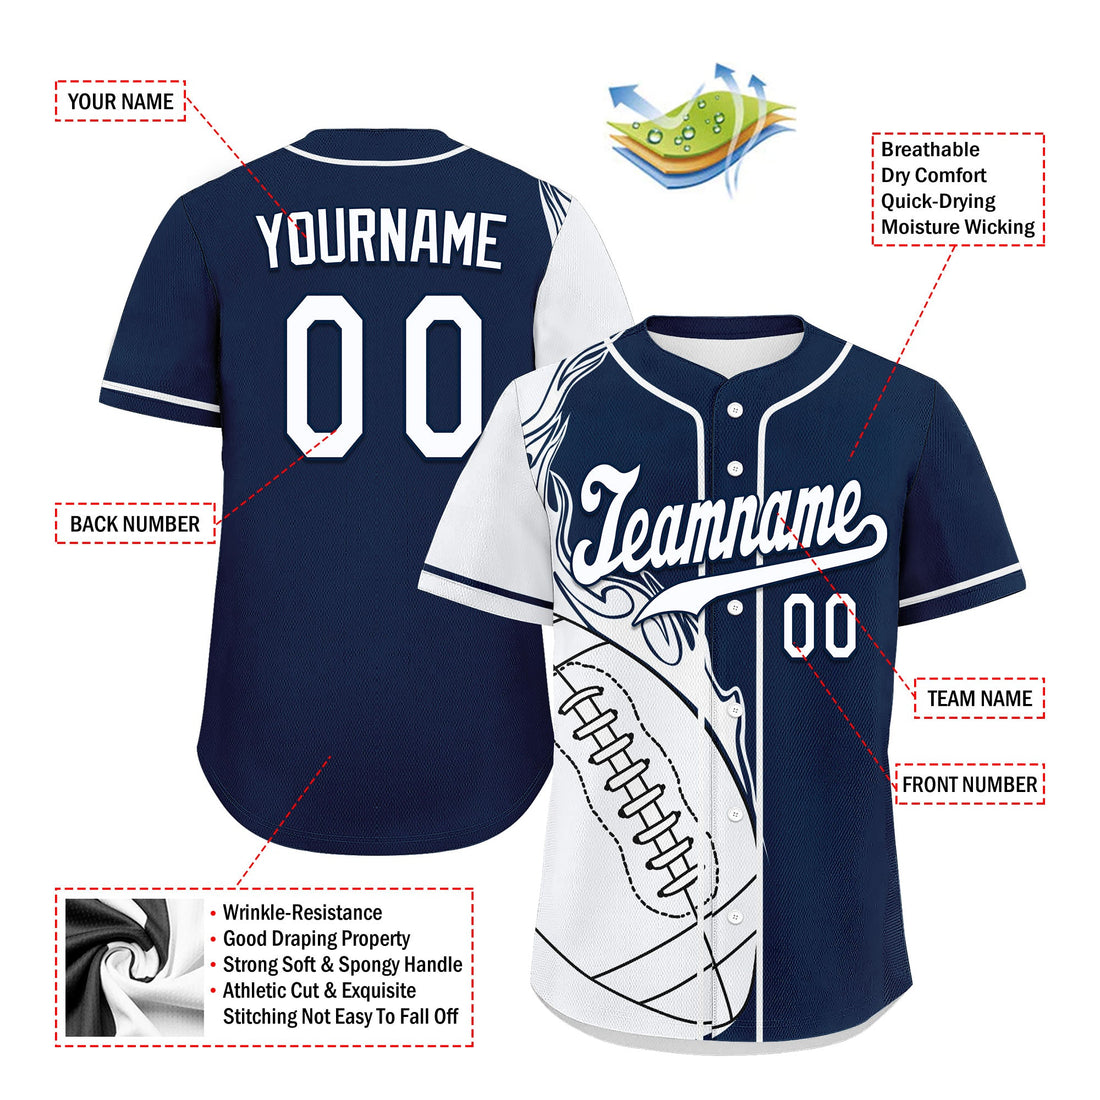 Custom Blue White Classic Style Personalized Authentic Baseball Jersey UN002-D0b0a00-9